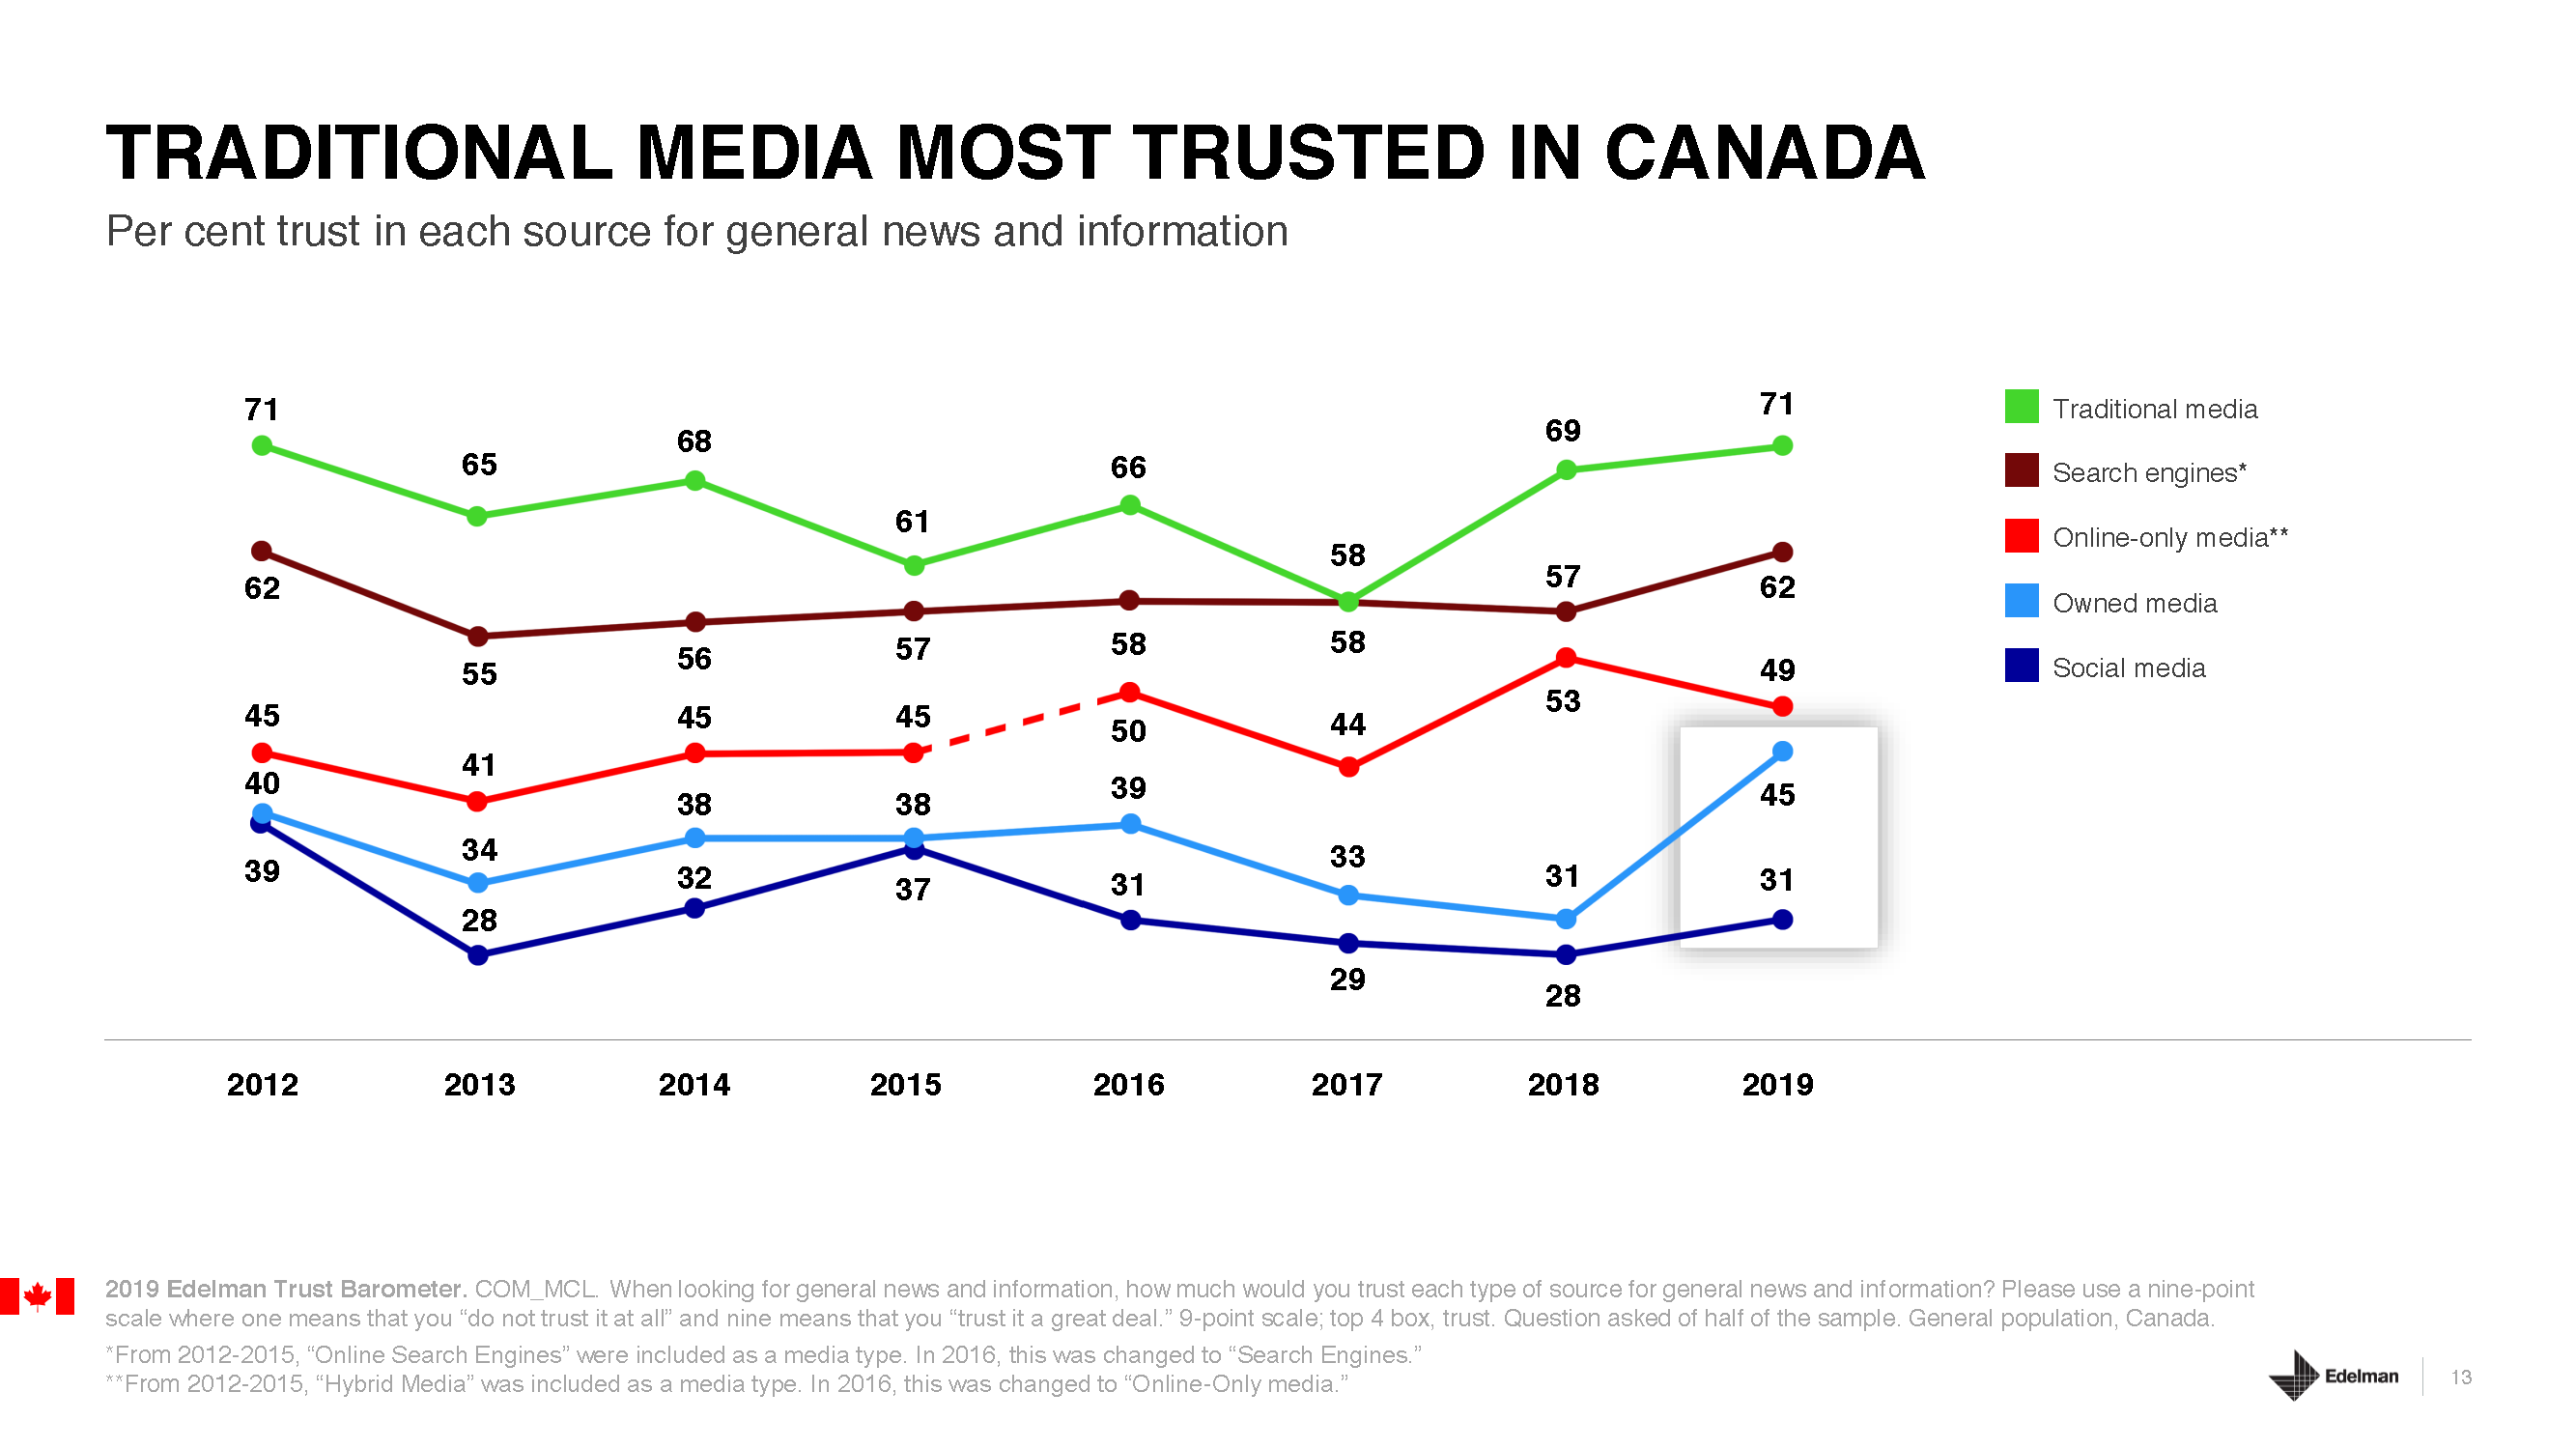 Chart from the 2019 Edelman Trust Barometer report showing levels of trust Canadians show toward media outlets by type (traditional, social, online, etc).